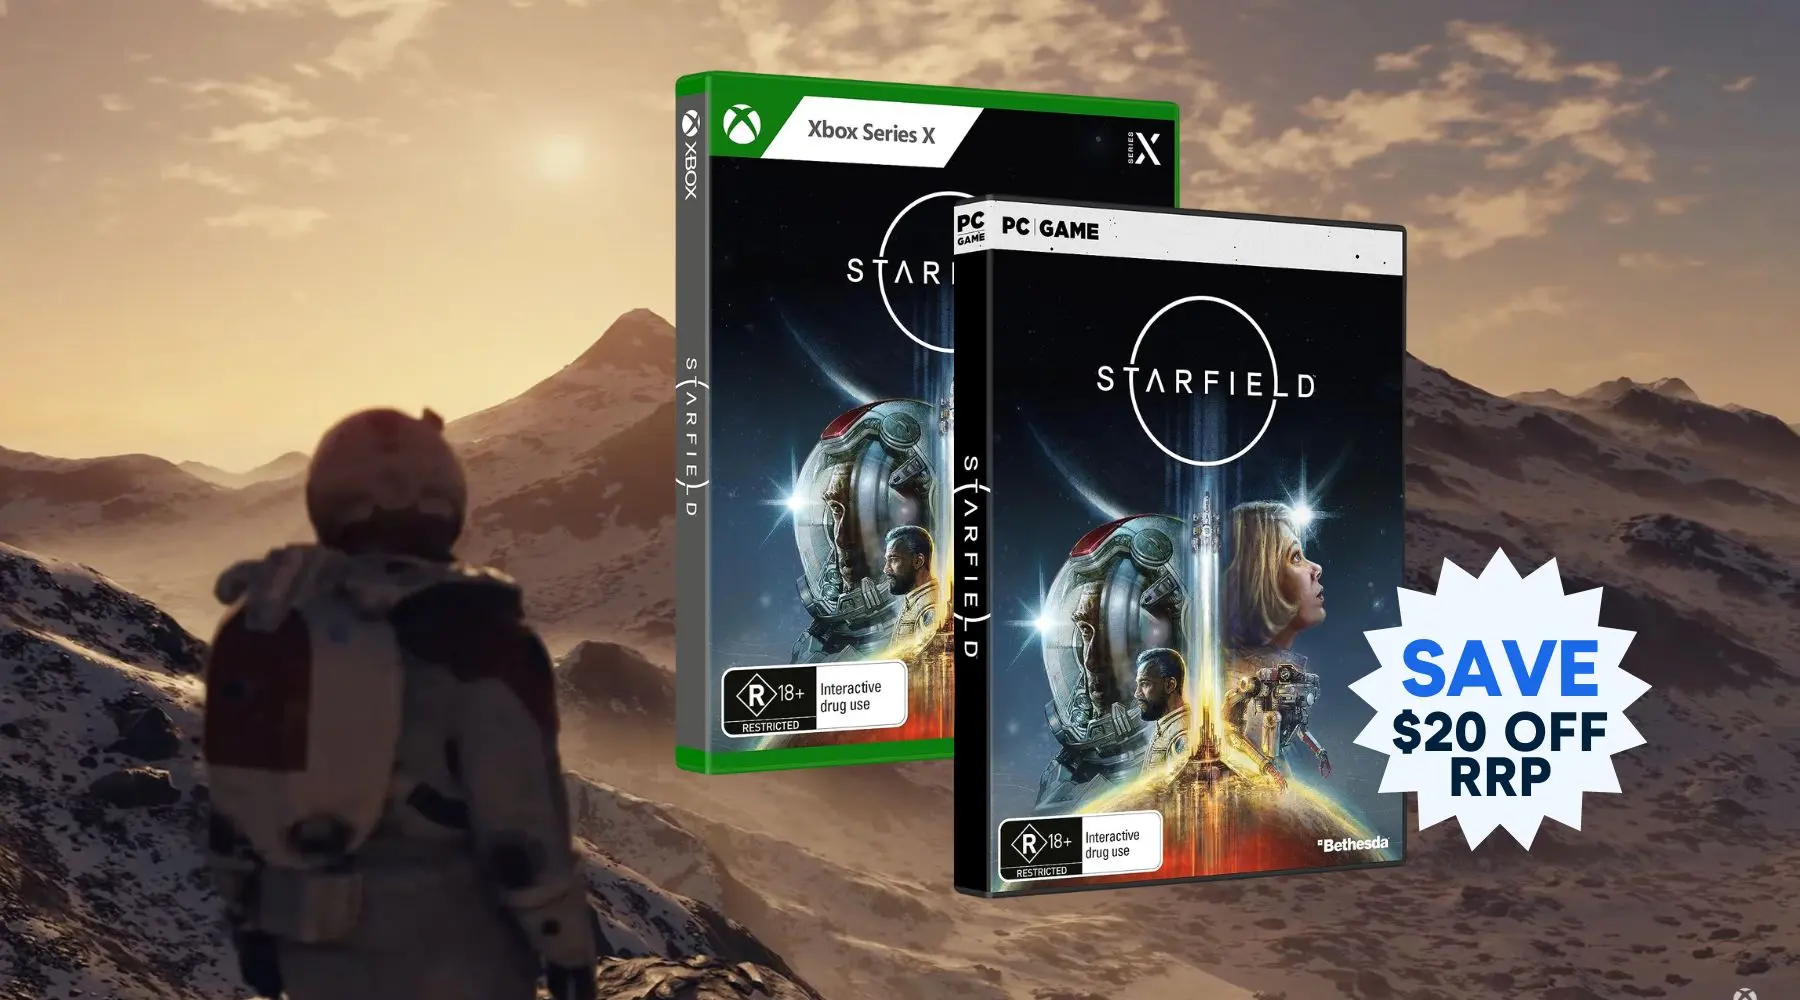 Can Starfield Save Bethesda and Xbox?